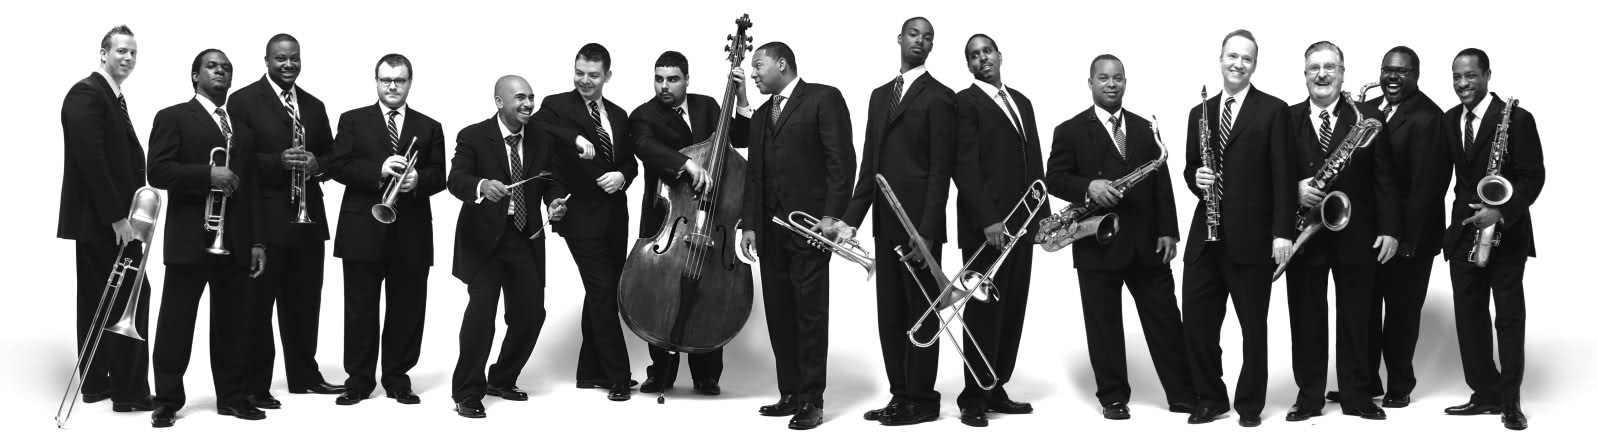 THE JAZZ AT LINCOLN CENTER ORCHESTRA / LINCOLN CENTER JAZZ ORCHESTRA picture